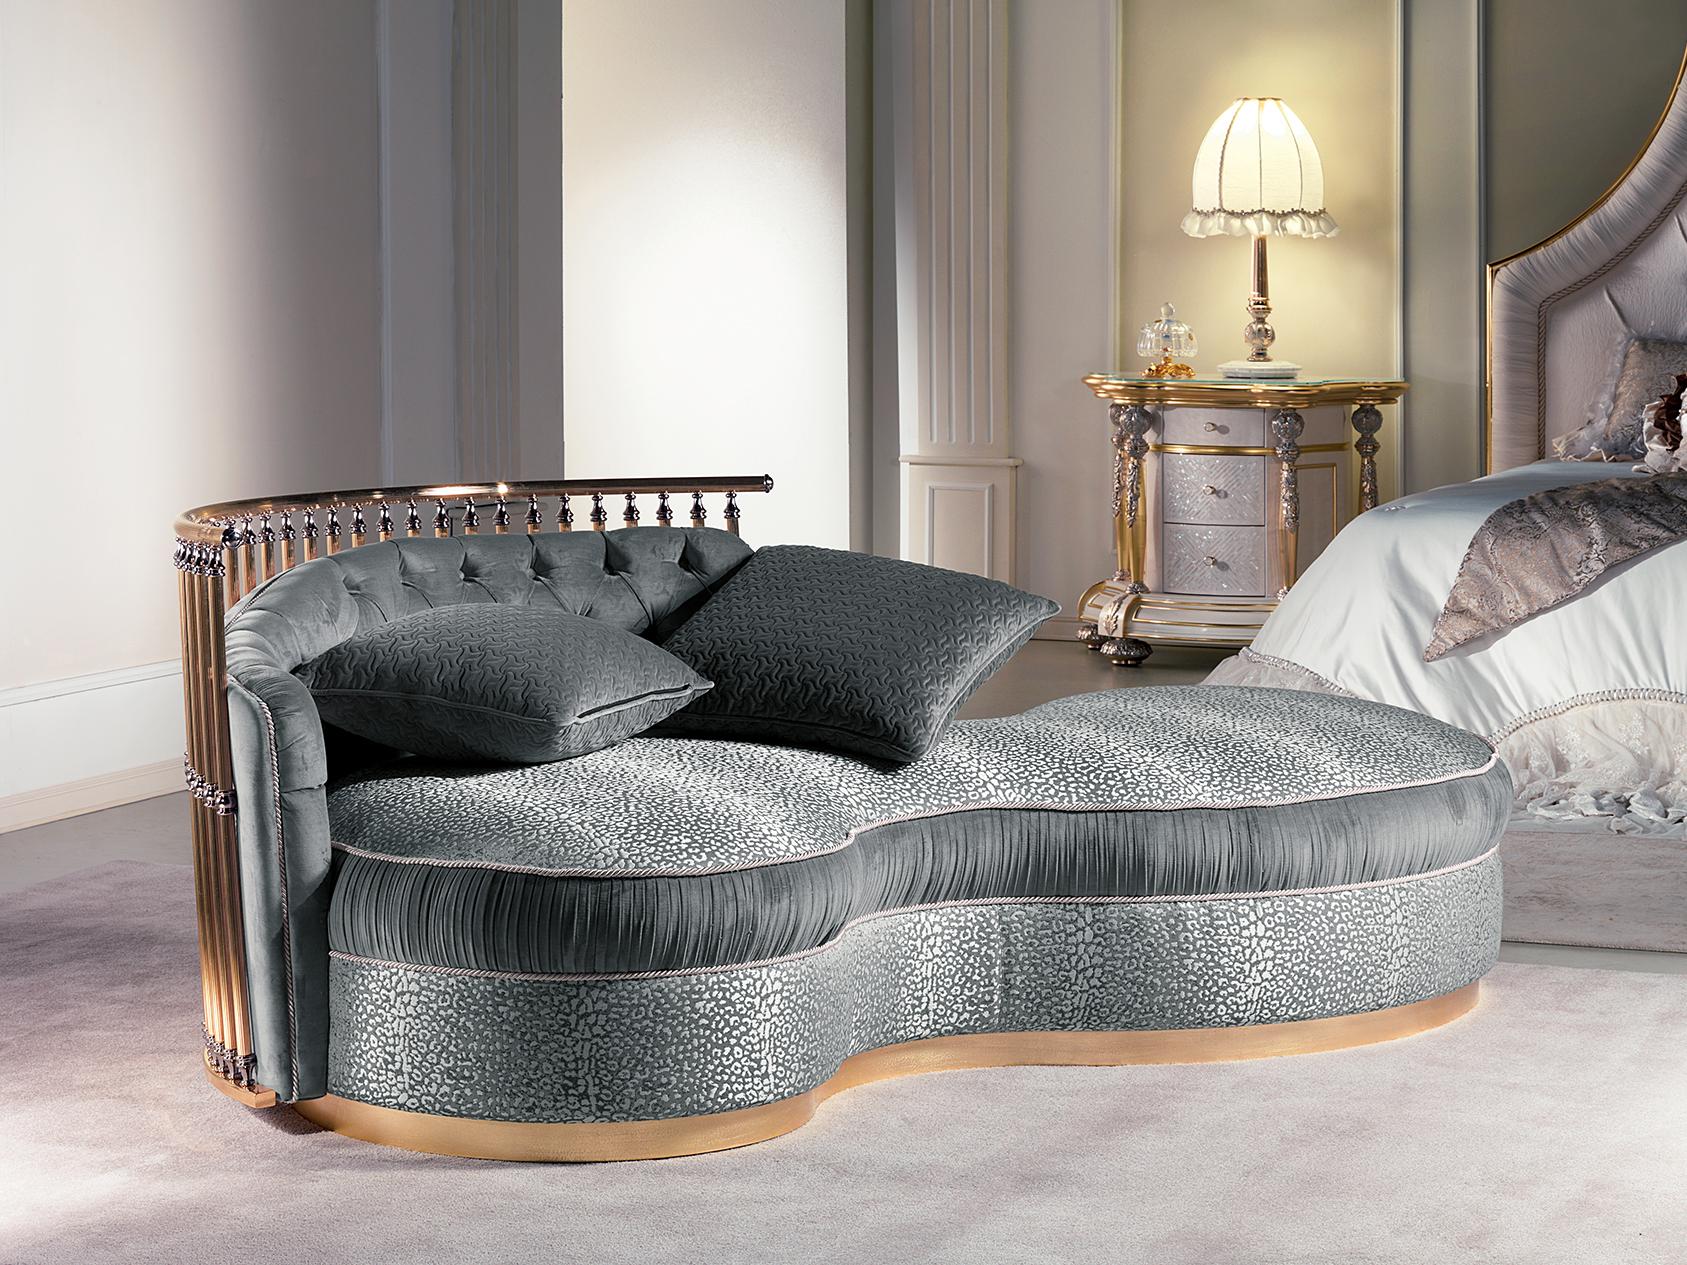 The AQ106 dormeuse perfectly represents the combination of comfort and design that characterizes Cappelletti's production.

High Quality Materials: The base of this dormeuse is made of fine wood, lending solidity and stability to the piece. Gold